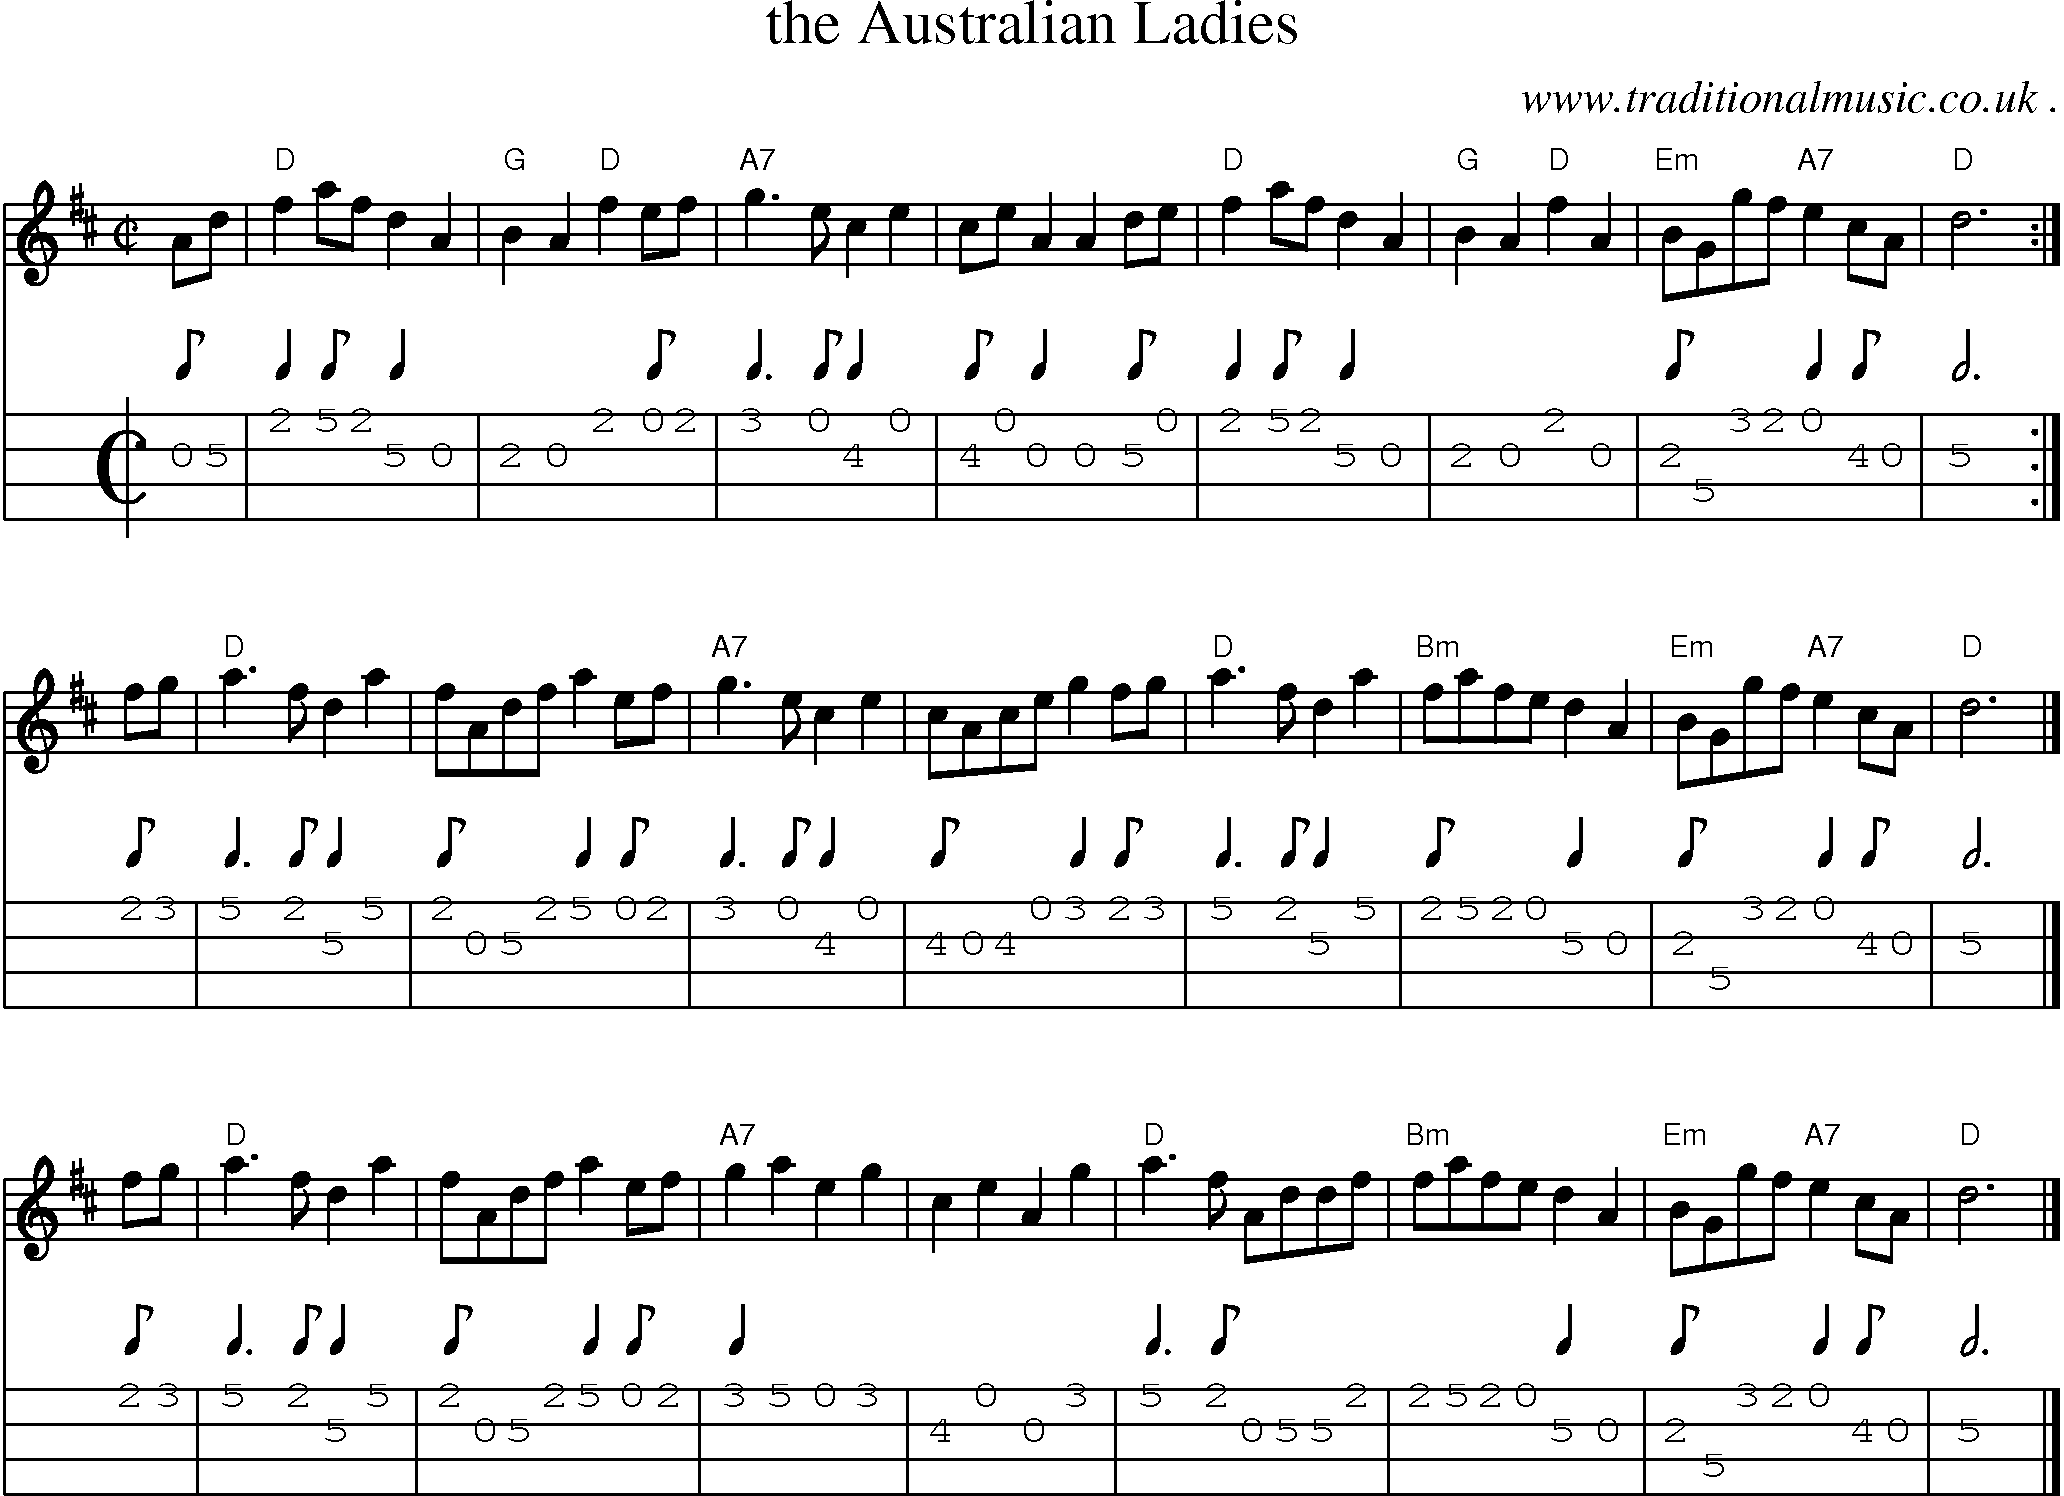 Sheet-music  score, Chords and Mandolin Tabs for The Australian Ladies